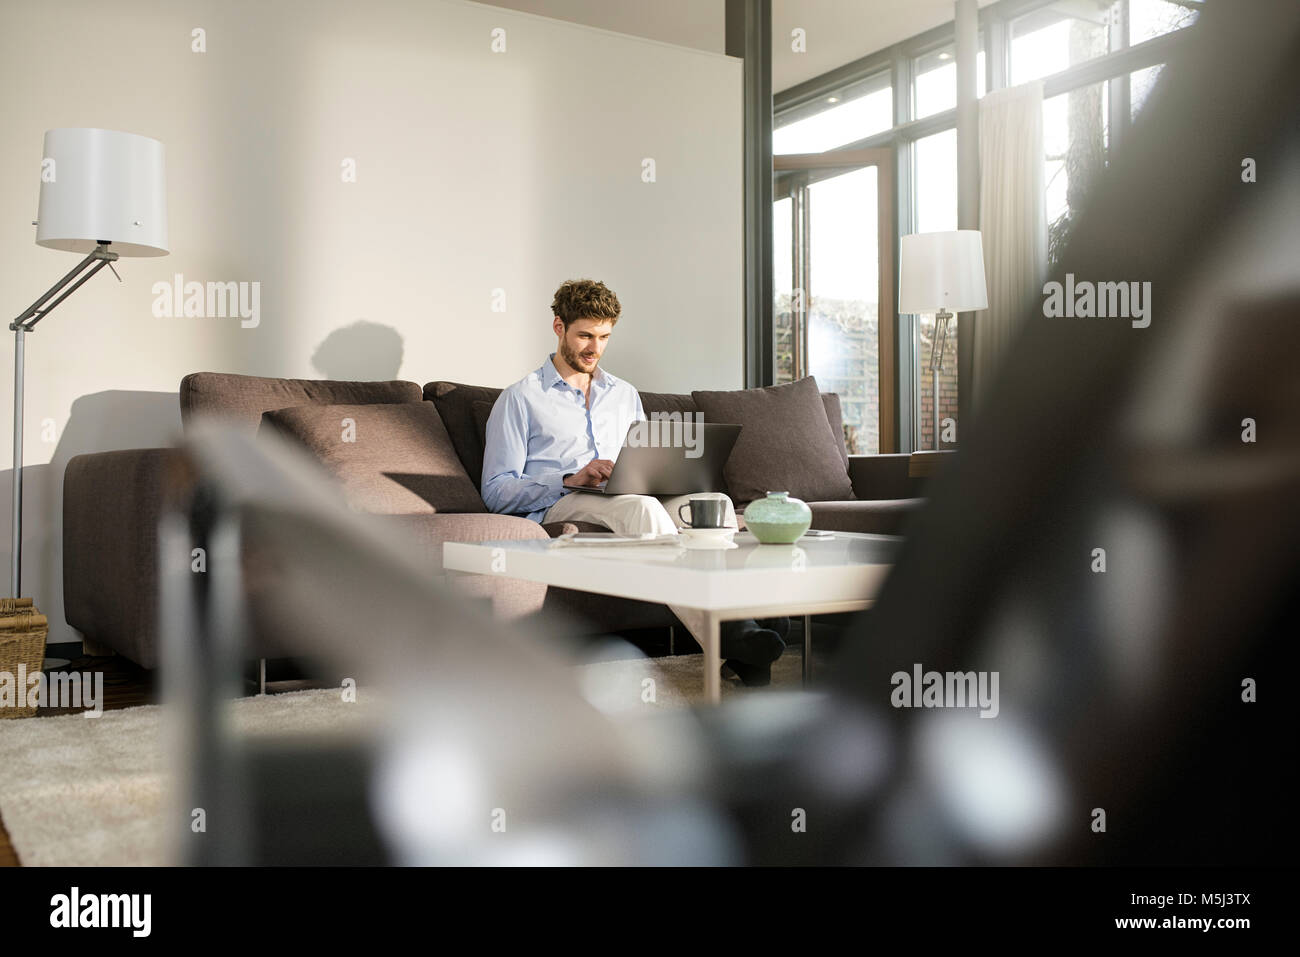 Man sitting on couch at home using laptop Stock Photo